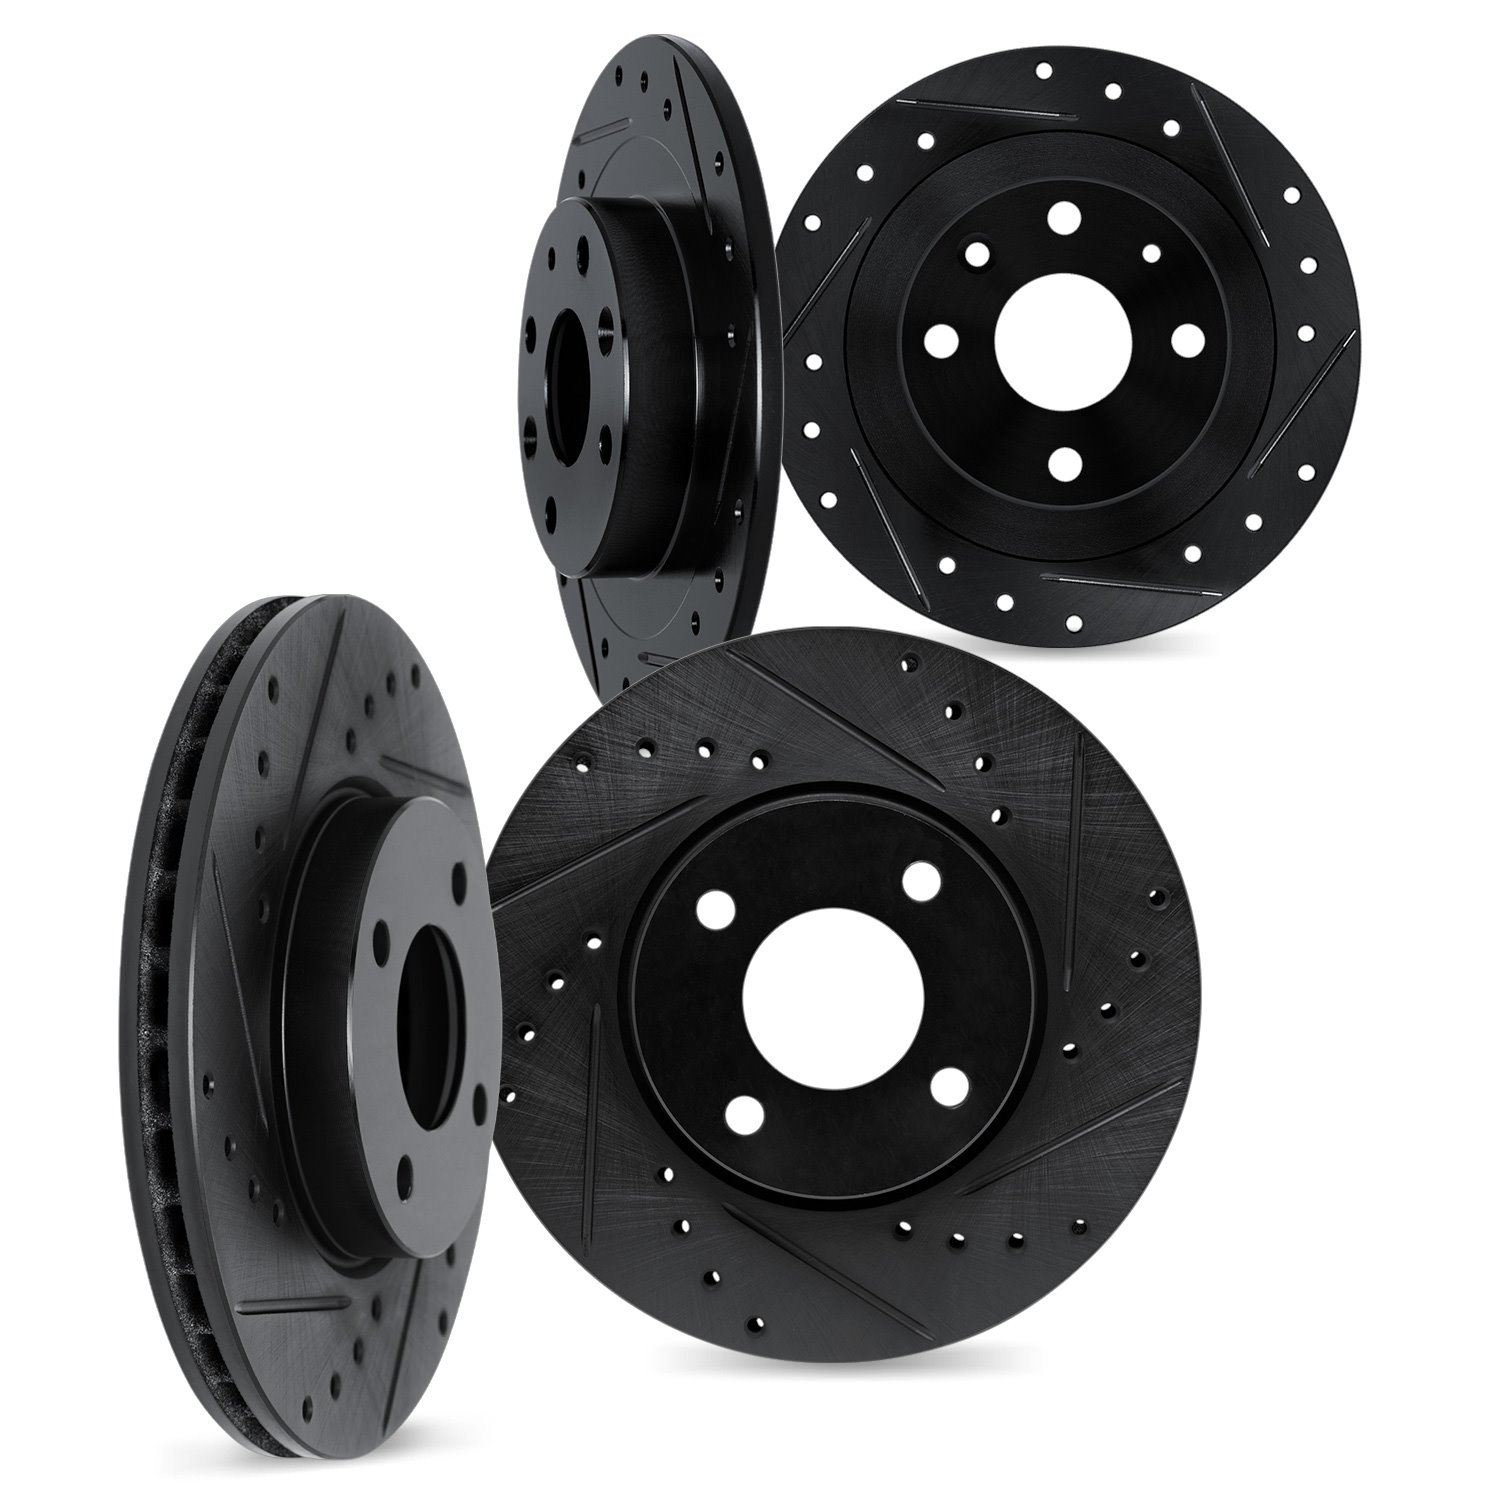 8004-67029 Drilled/Slotted Brake Rotors [Black], 1995-2000 Infiniti/Nissan, Position: Front and Rear